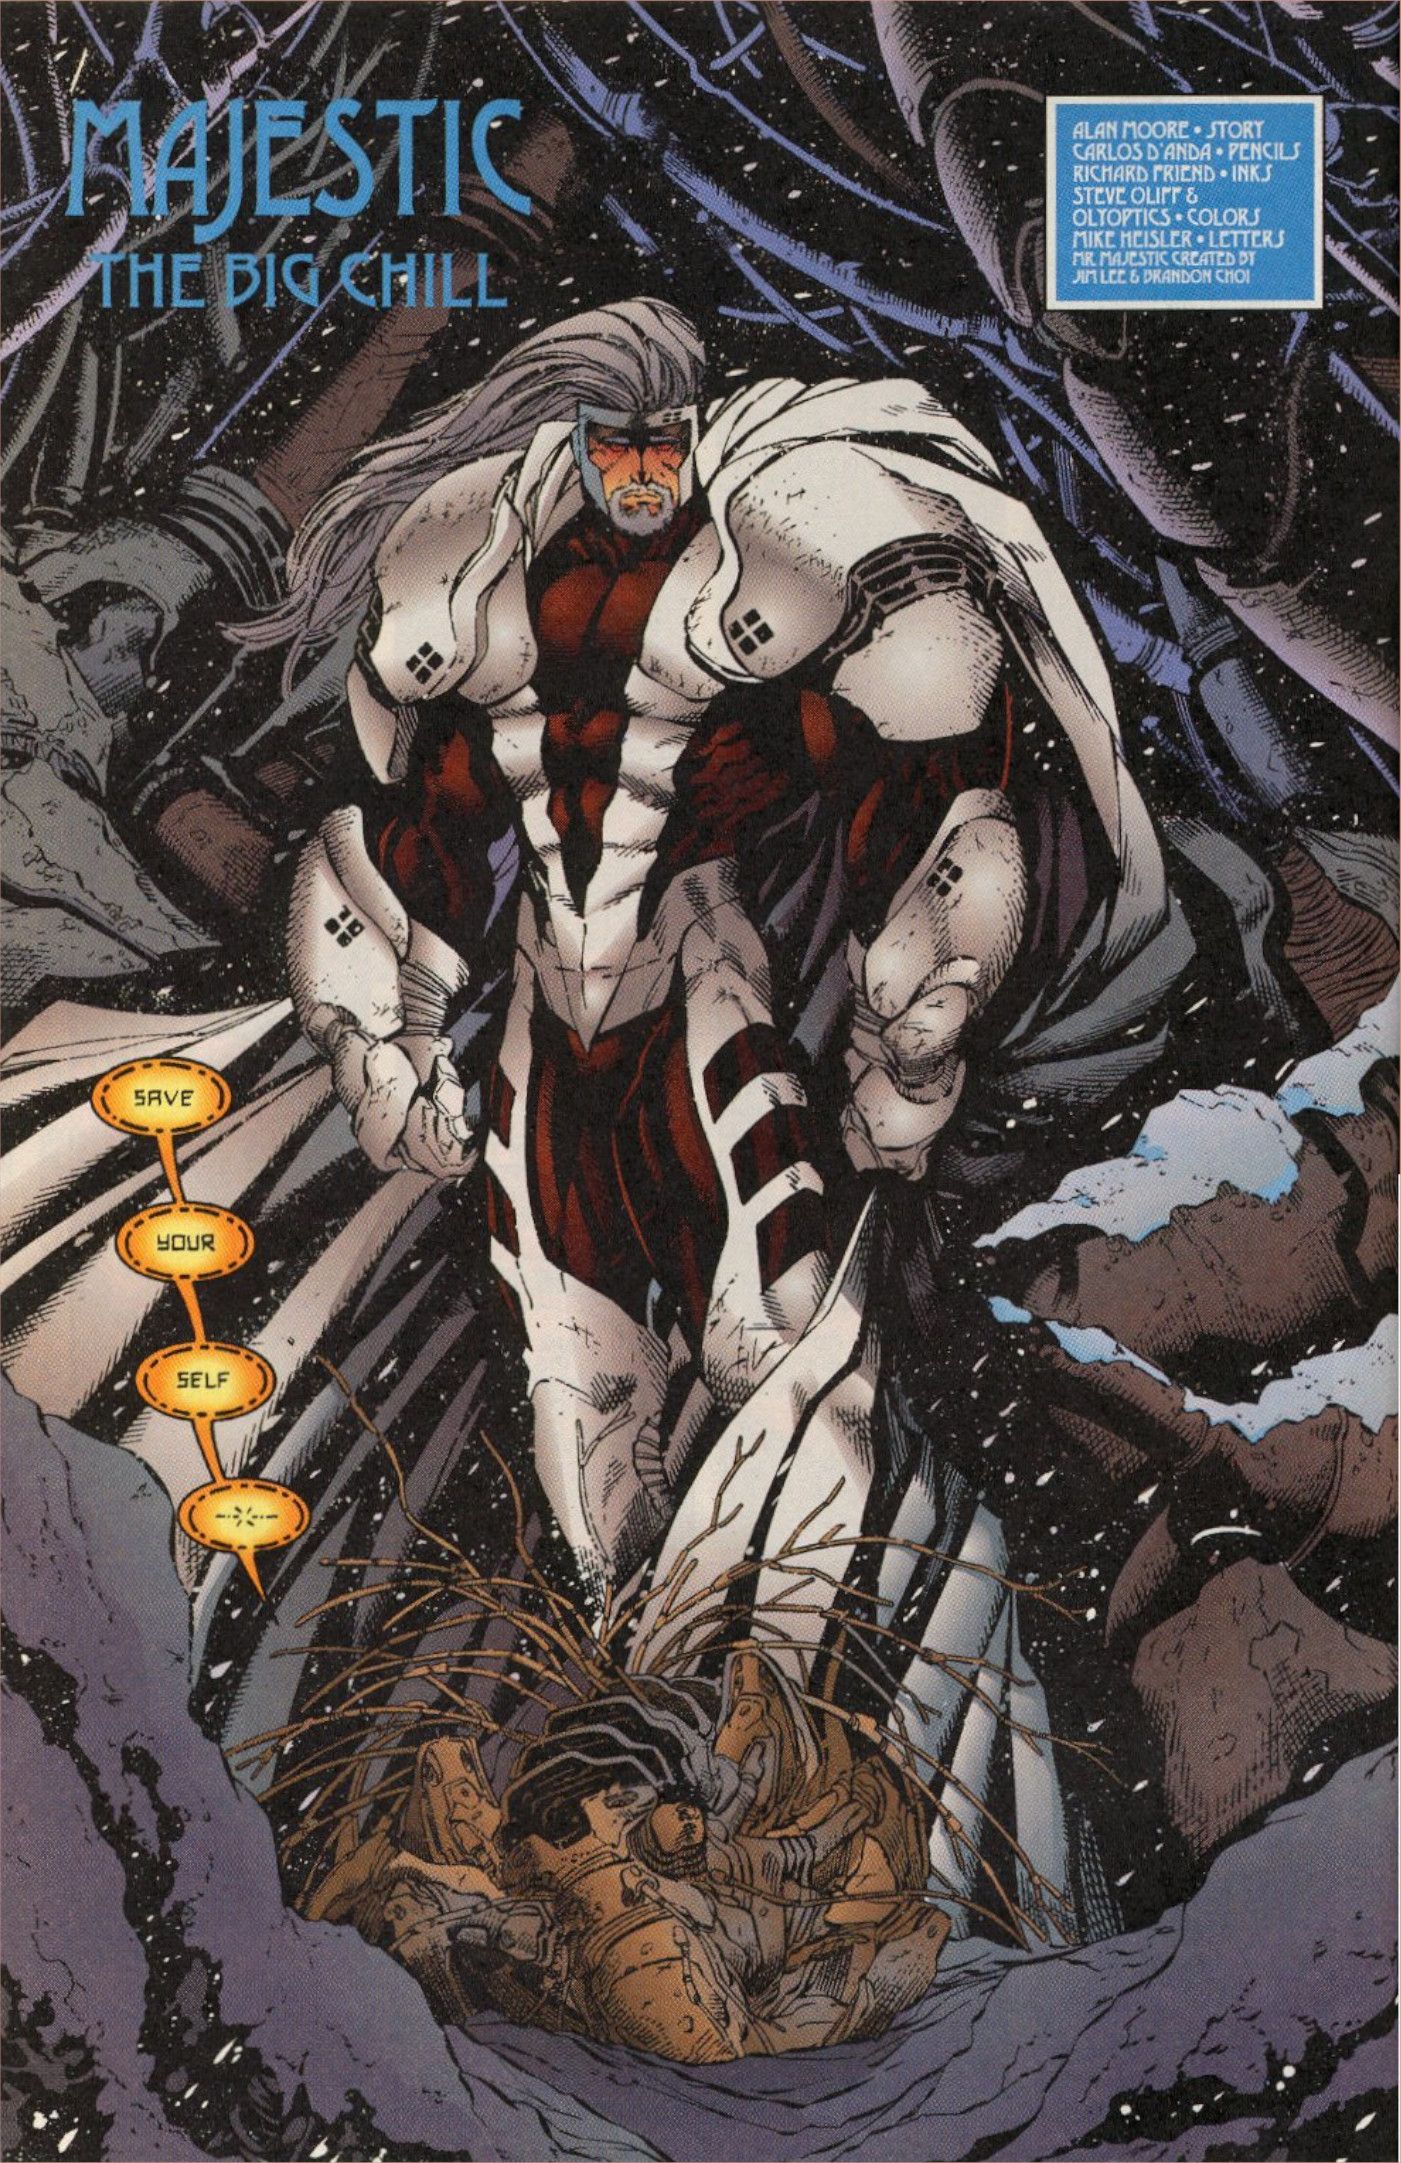 The Big Chill - Wildstorm DC hero Majestic is the last hero in the universe